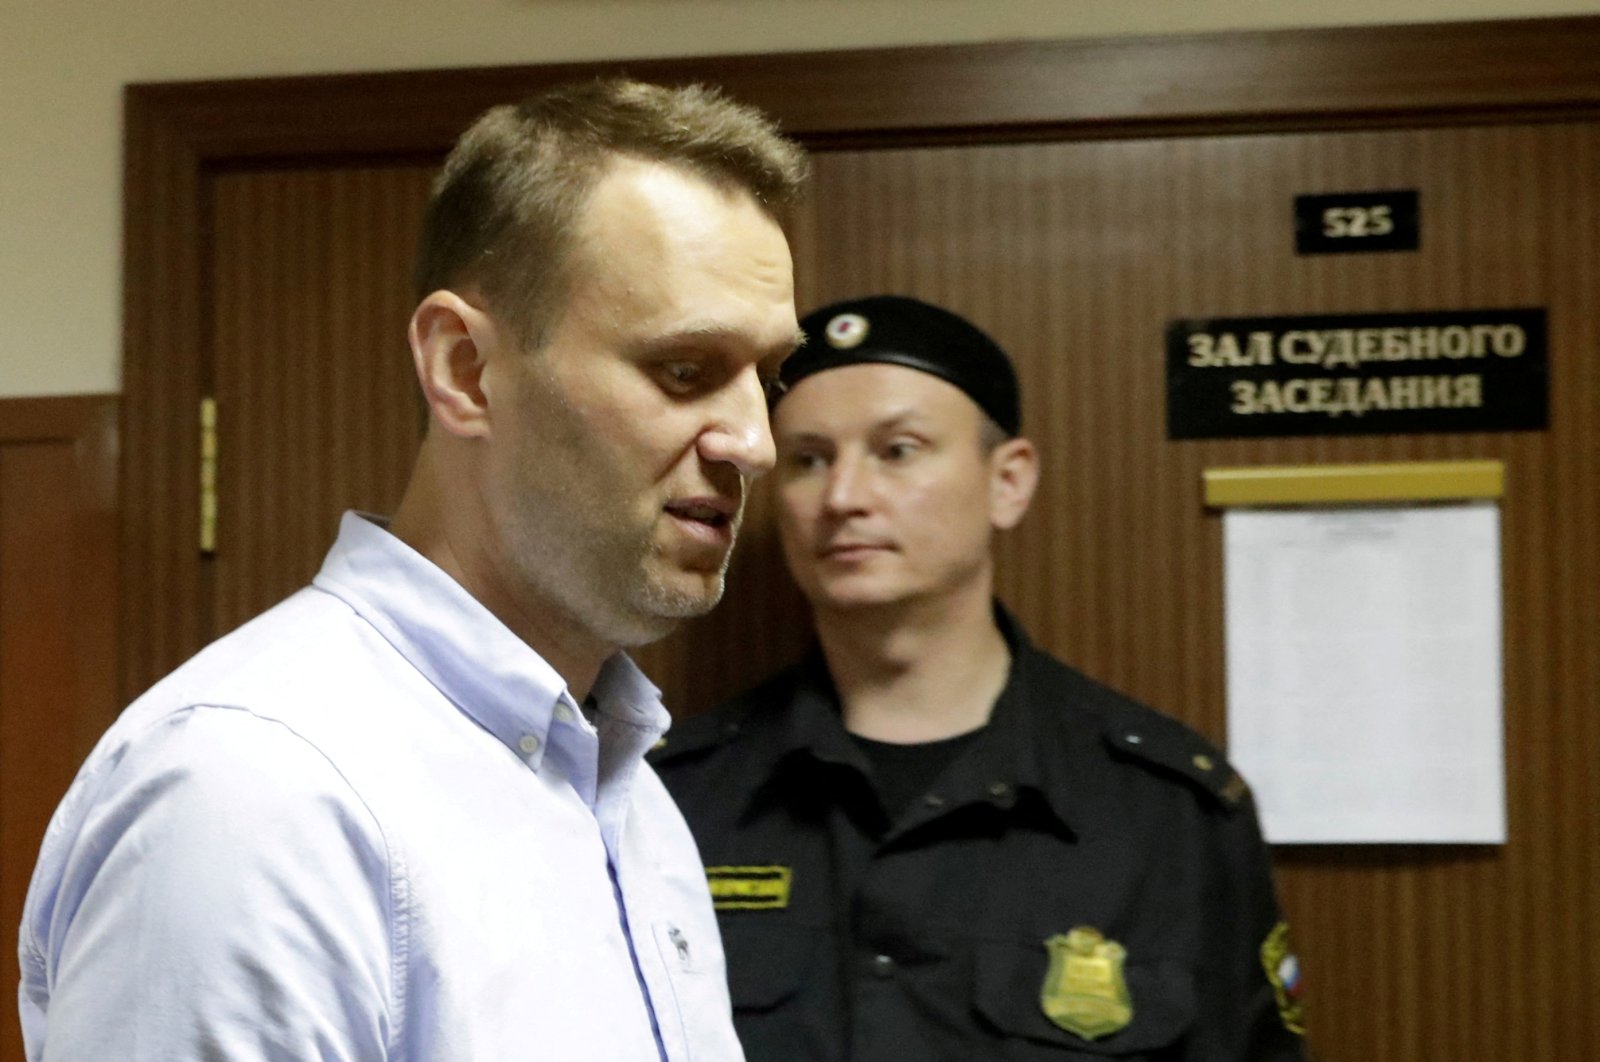 Russian opposition leader Alexei Navalny arrives for a hearing for his appeal at a court in Moscow, Russia, June 16, 2017. (Reuters File Photo)